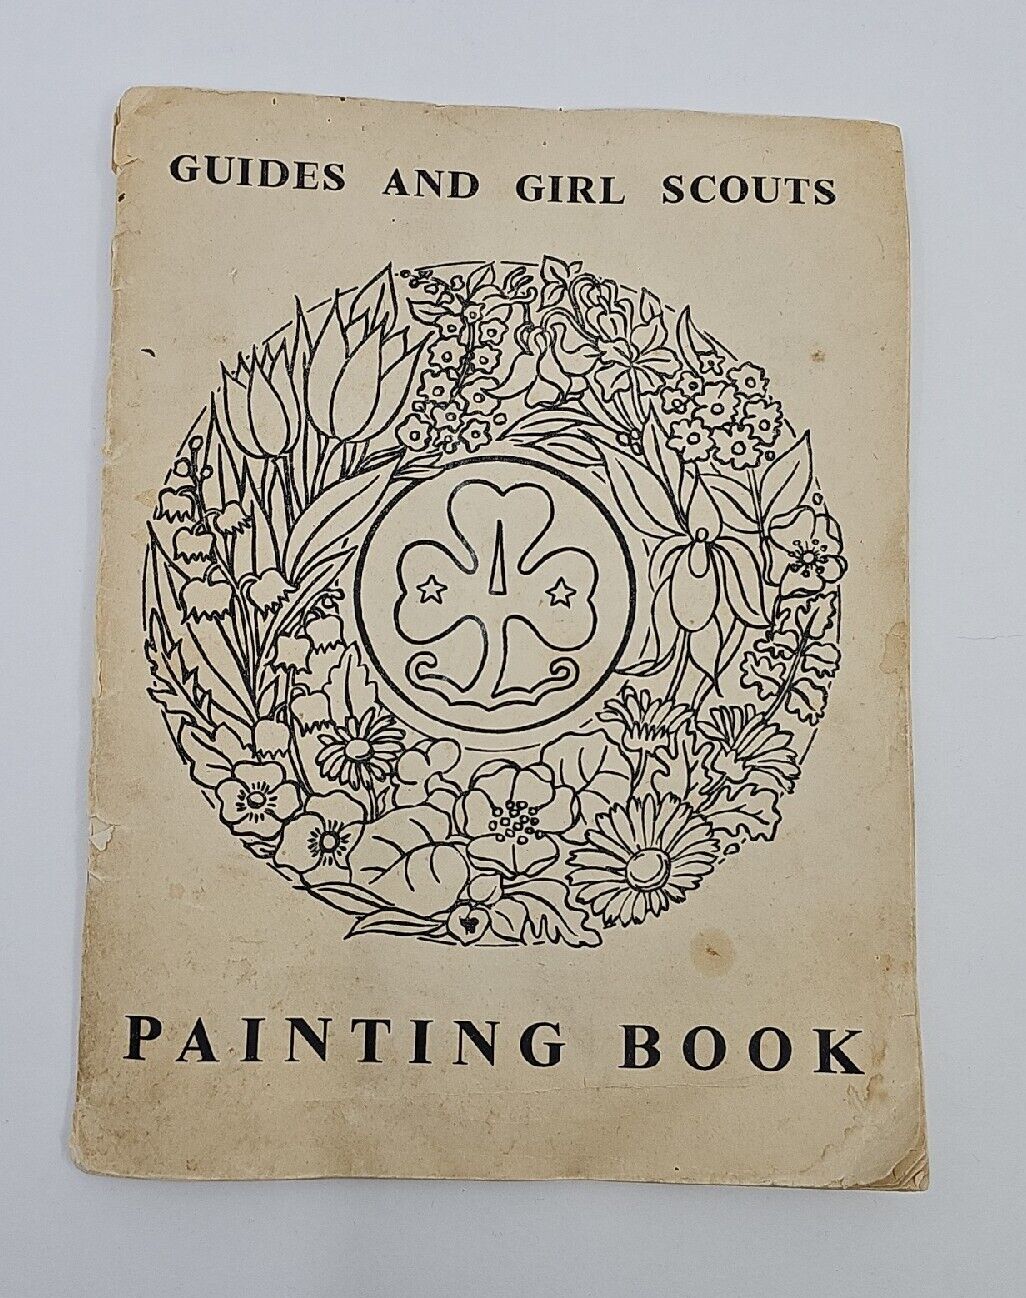 1936-48 Guides and Girl Scouts Painting Book, Uniforms/Badges of Countries